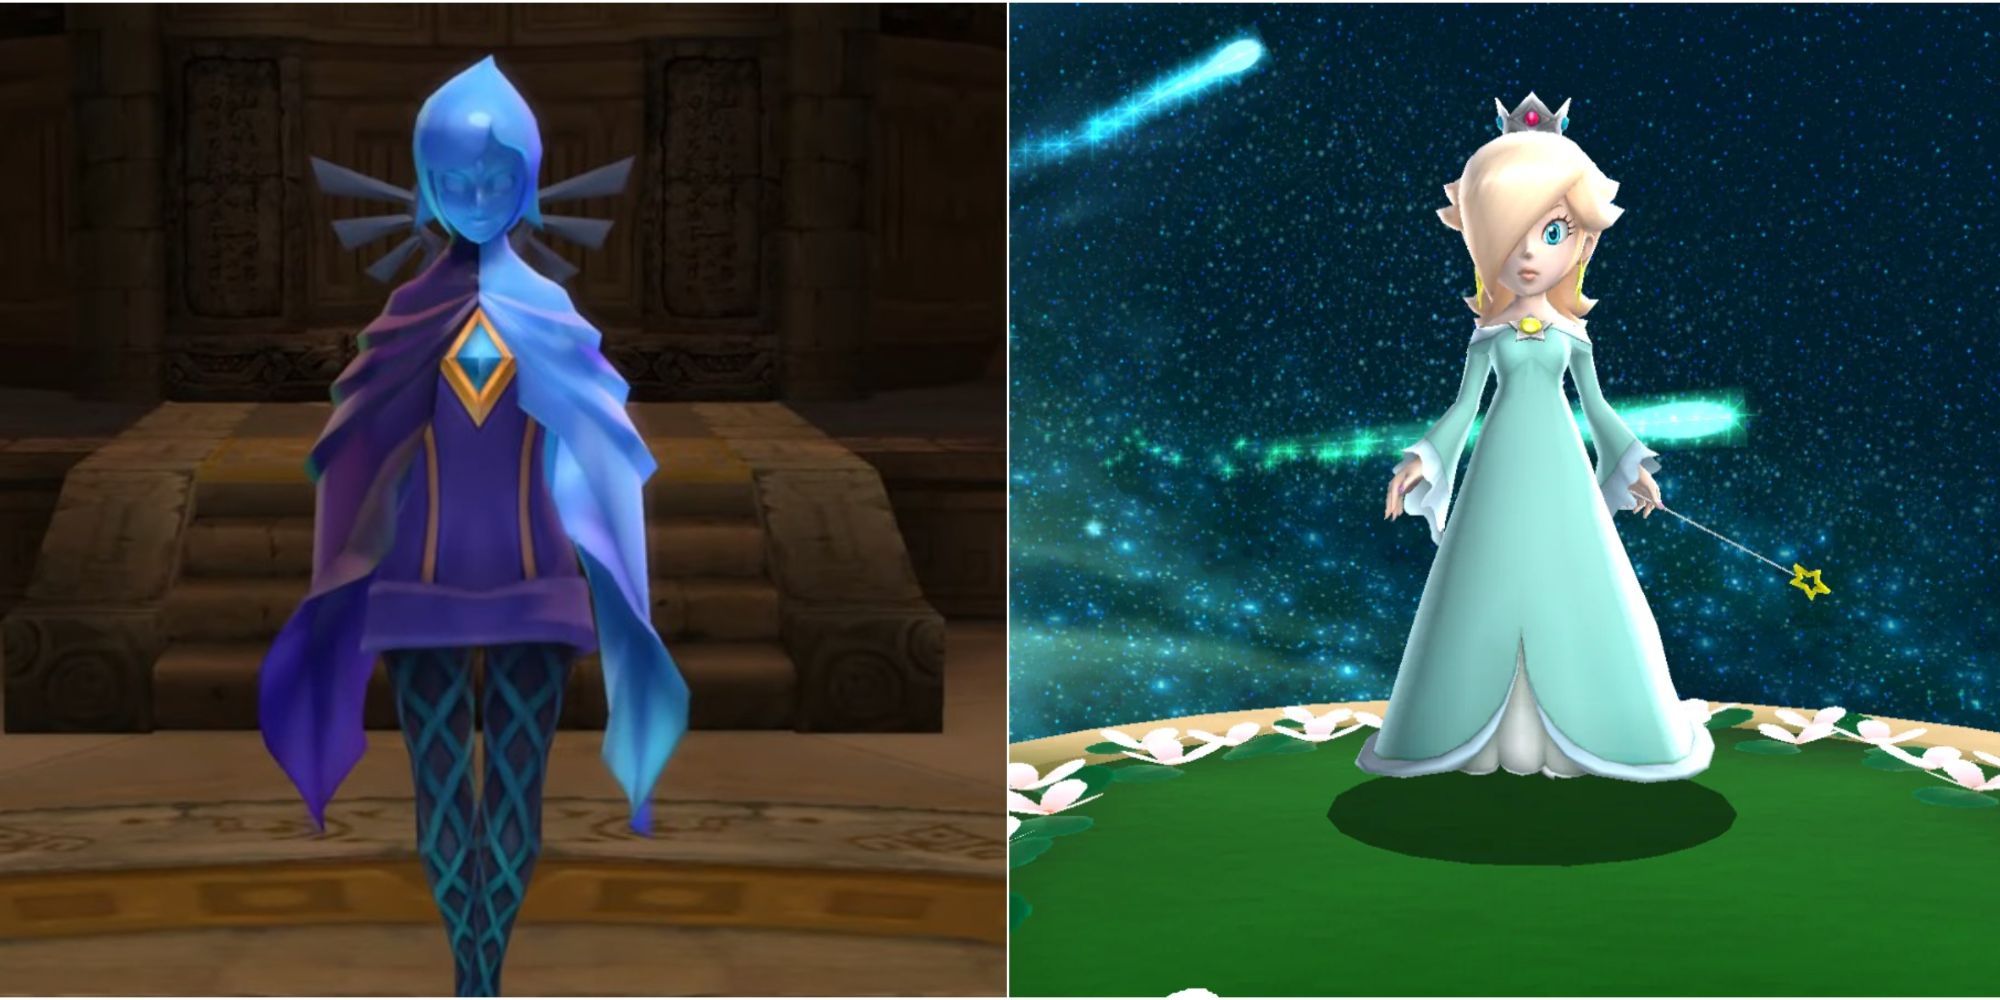 Fi from Skyward Sword beside Rosalina from Super Mario Galaxy, both looking directly out of the screen